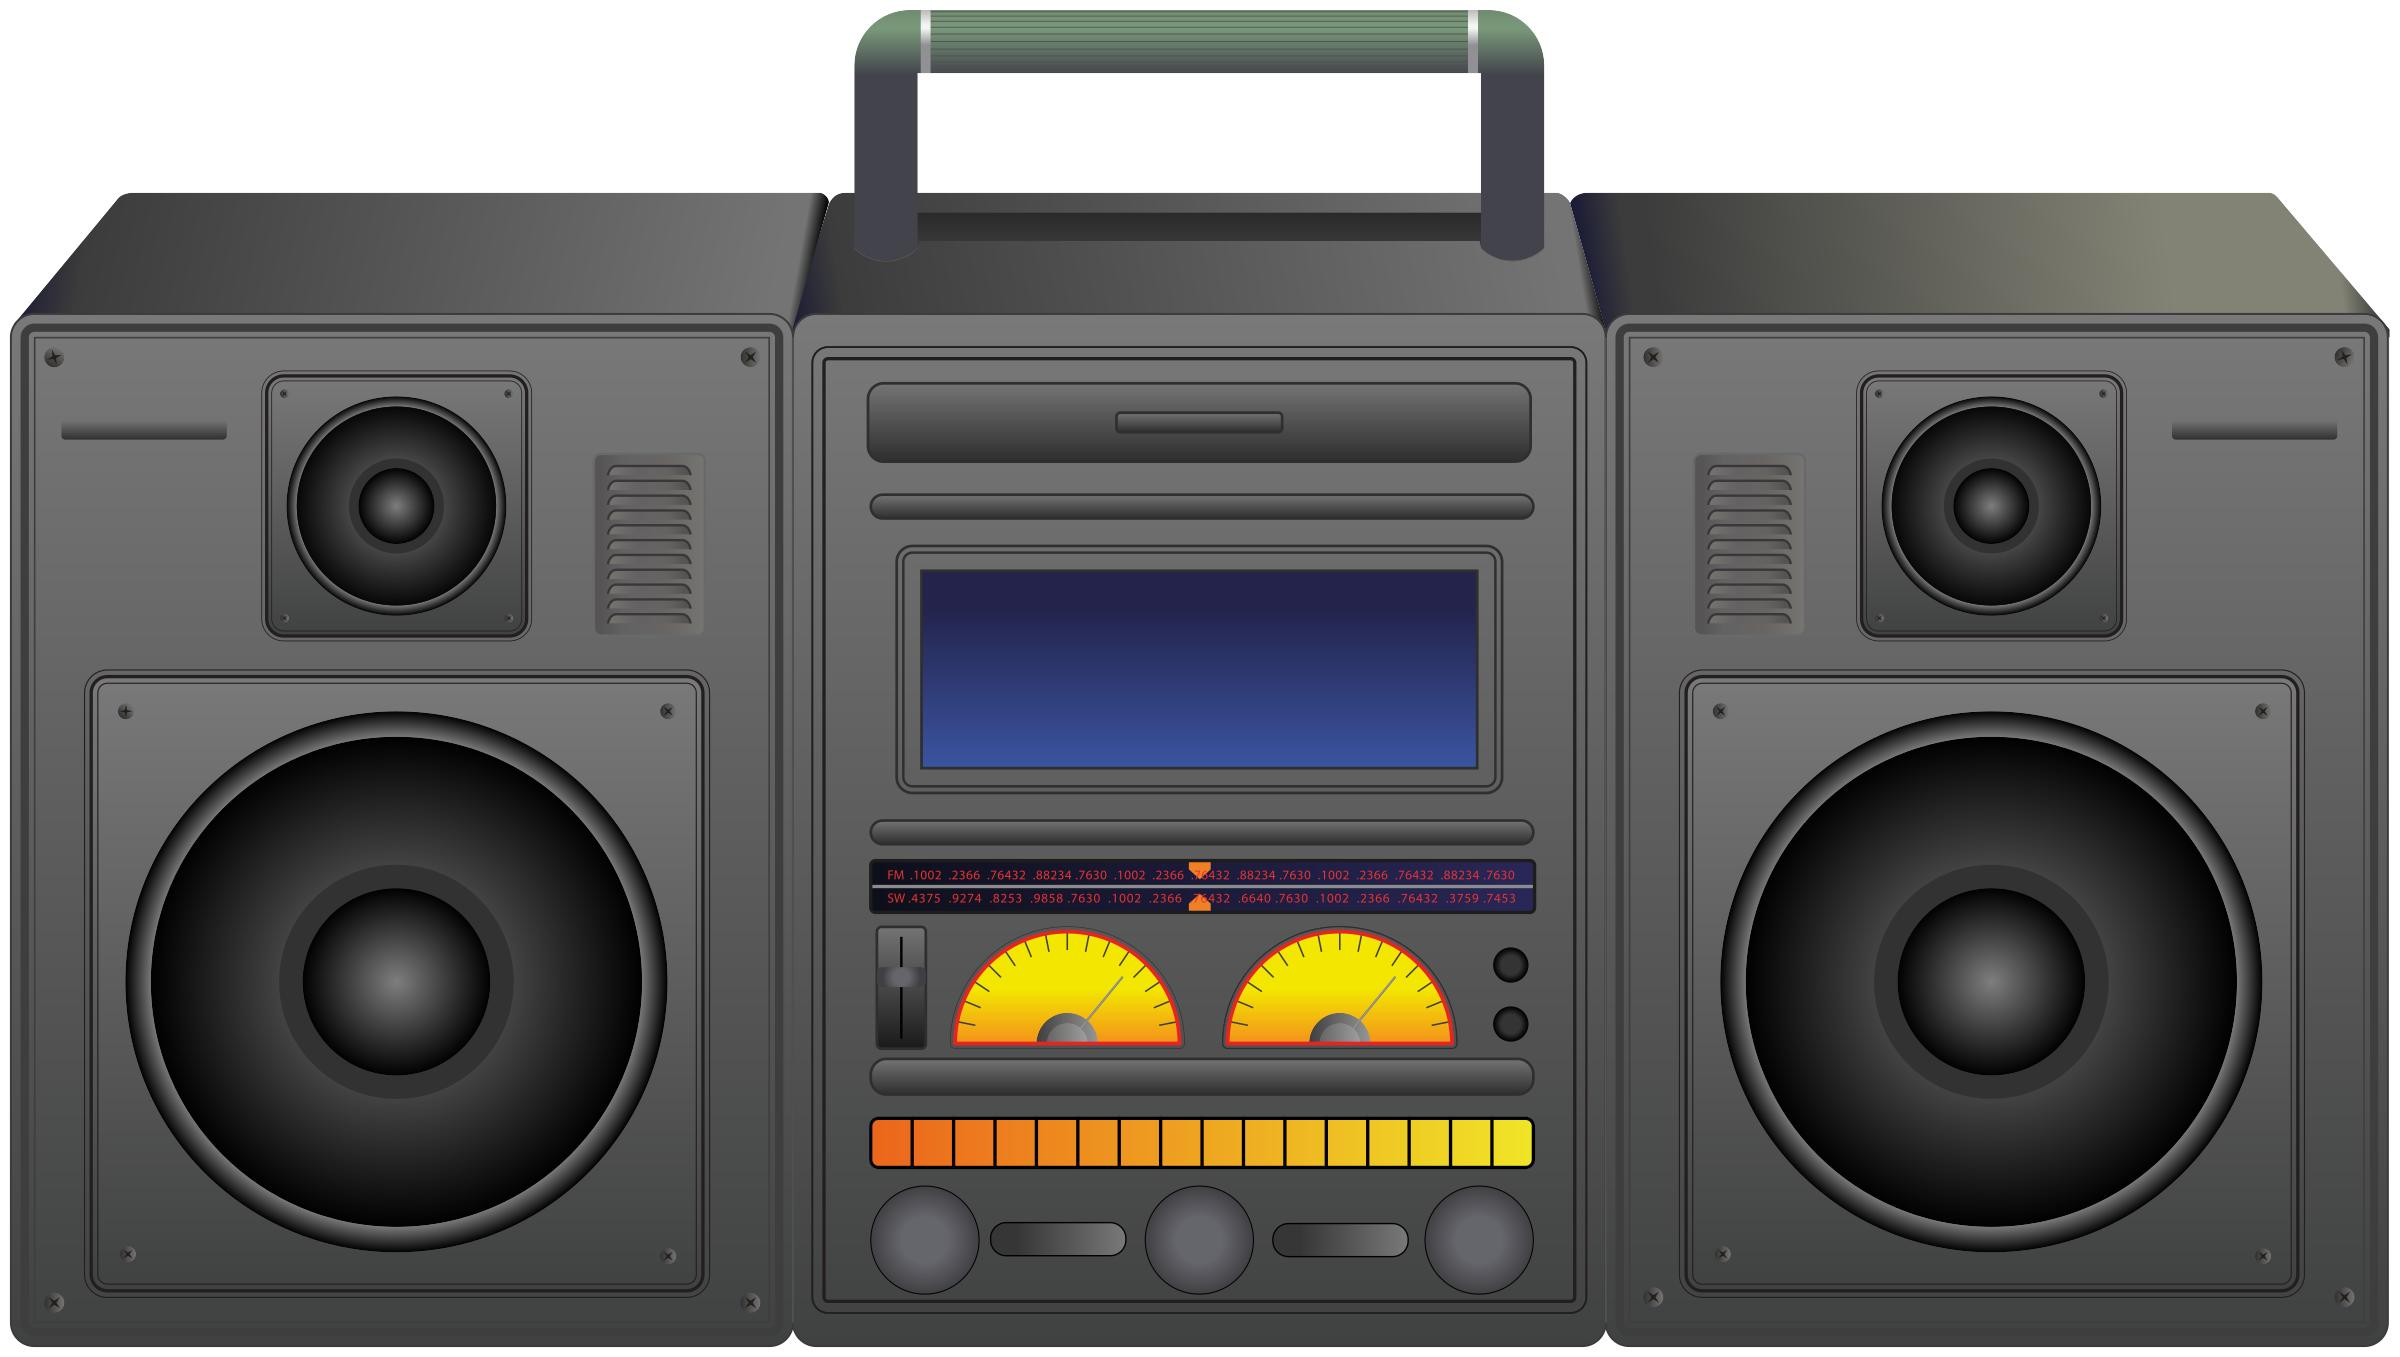 Boombox - portable music player icons